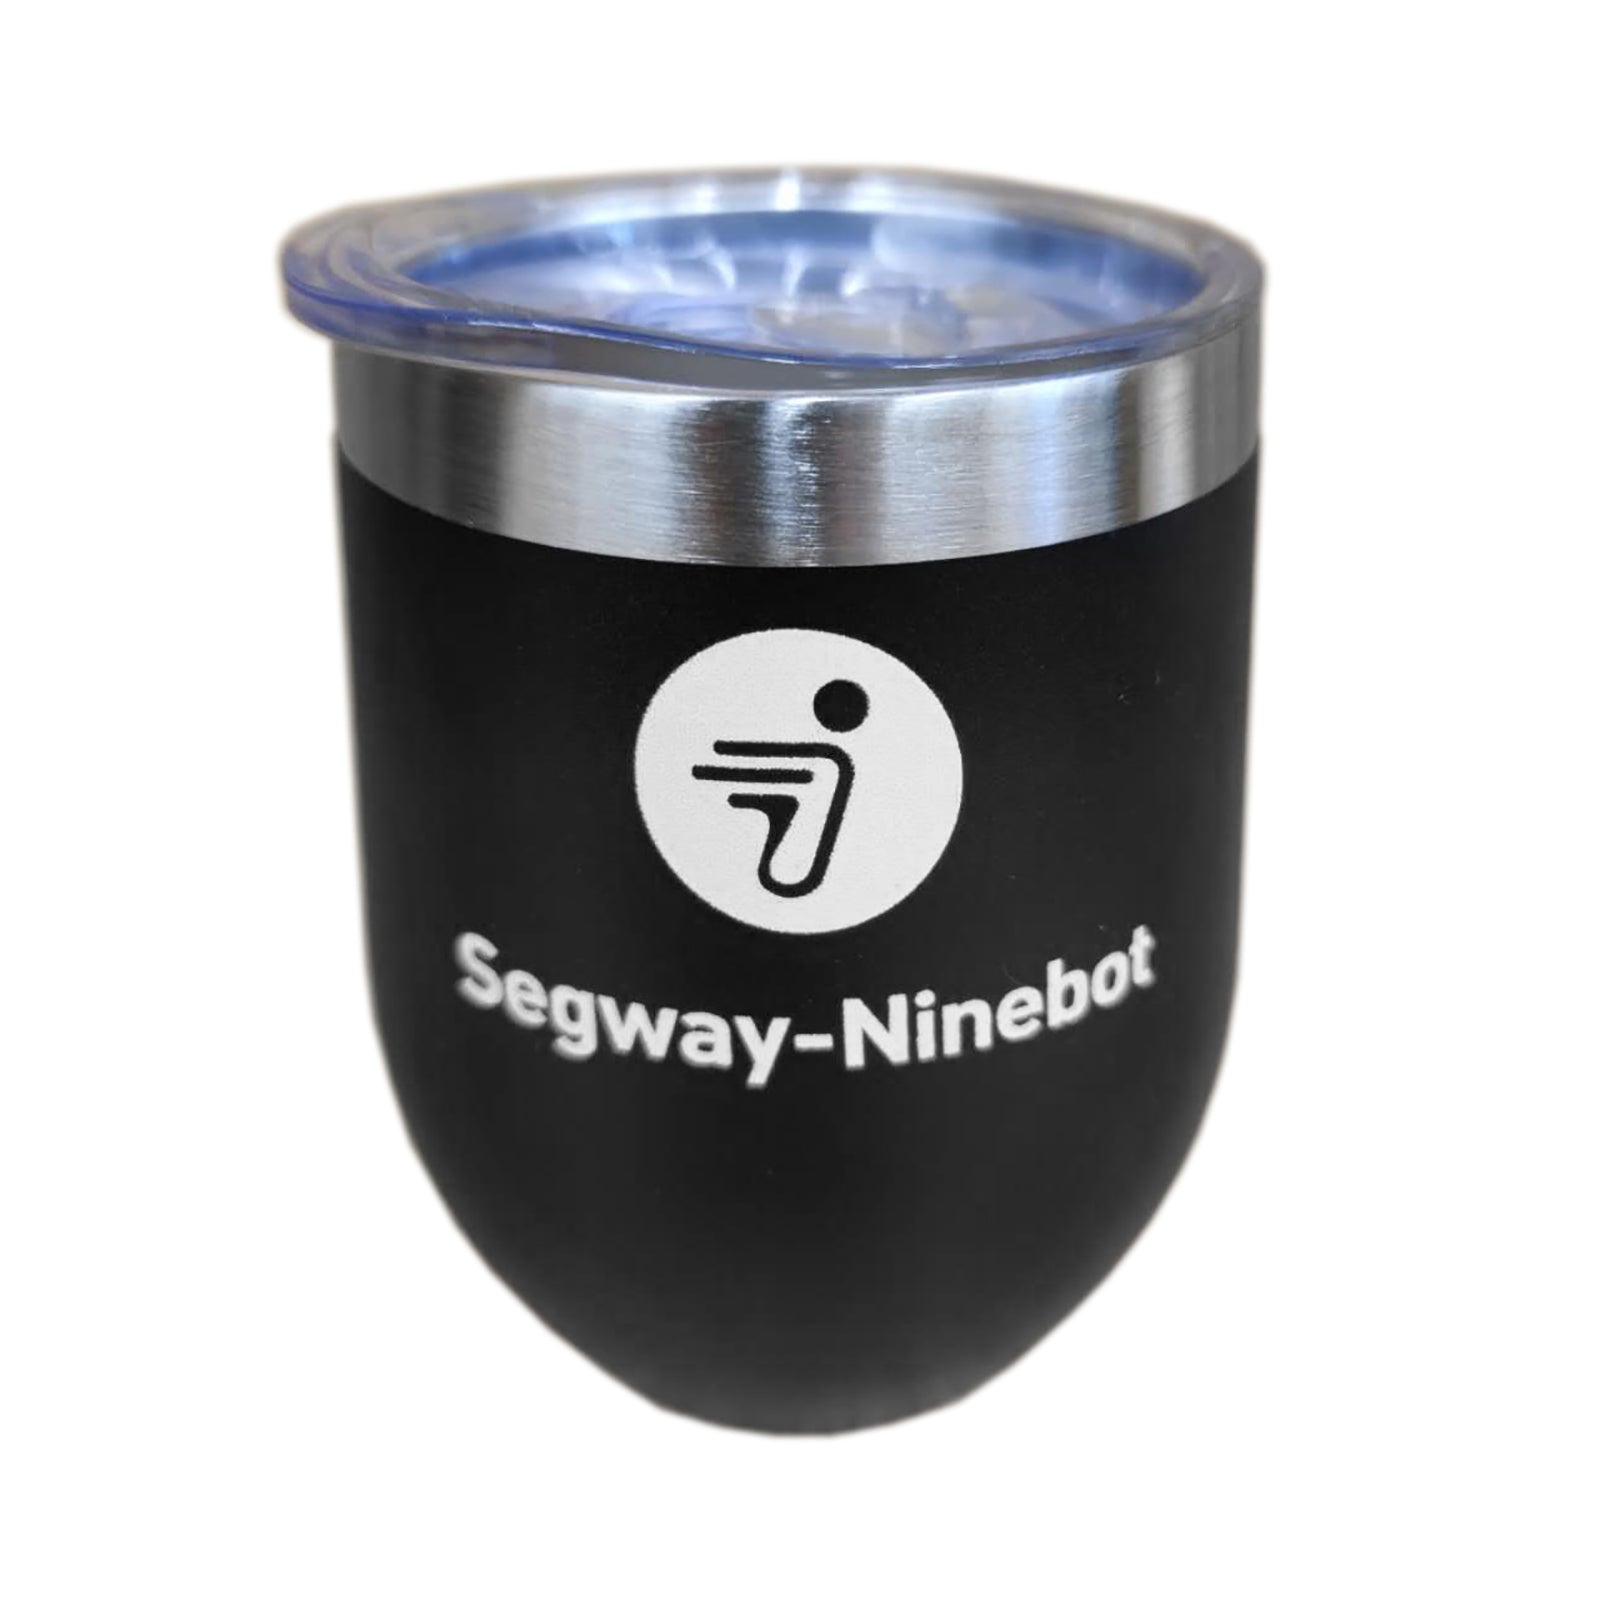 Segway Ninebot Cup-2 pack